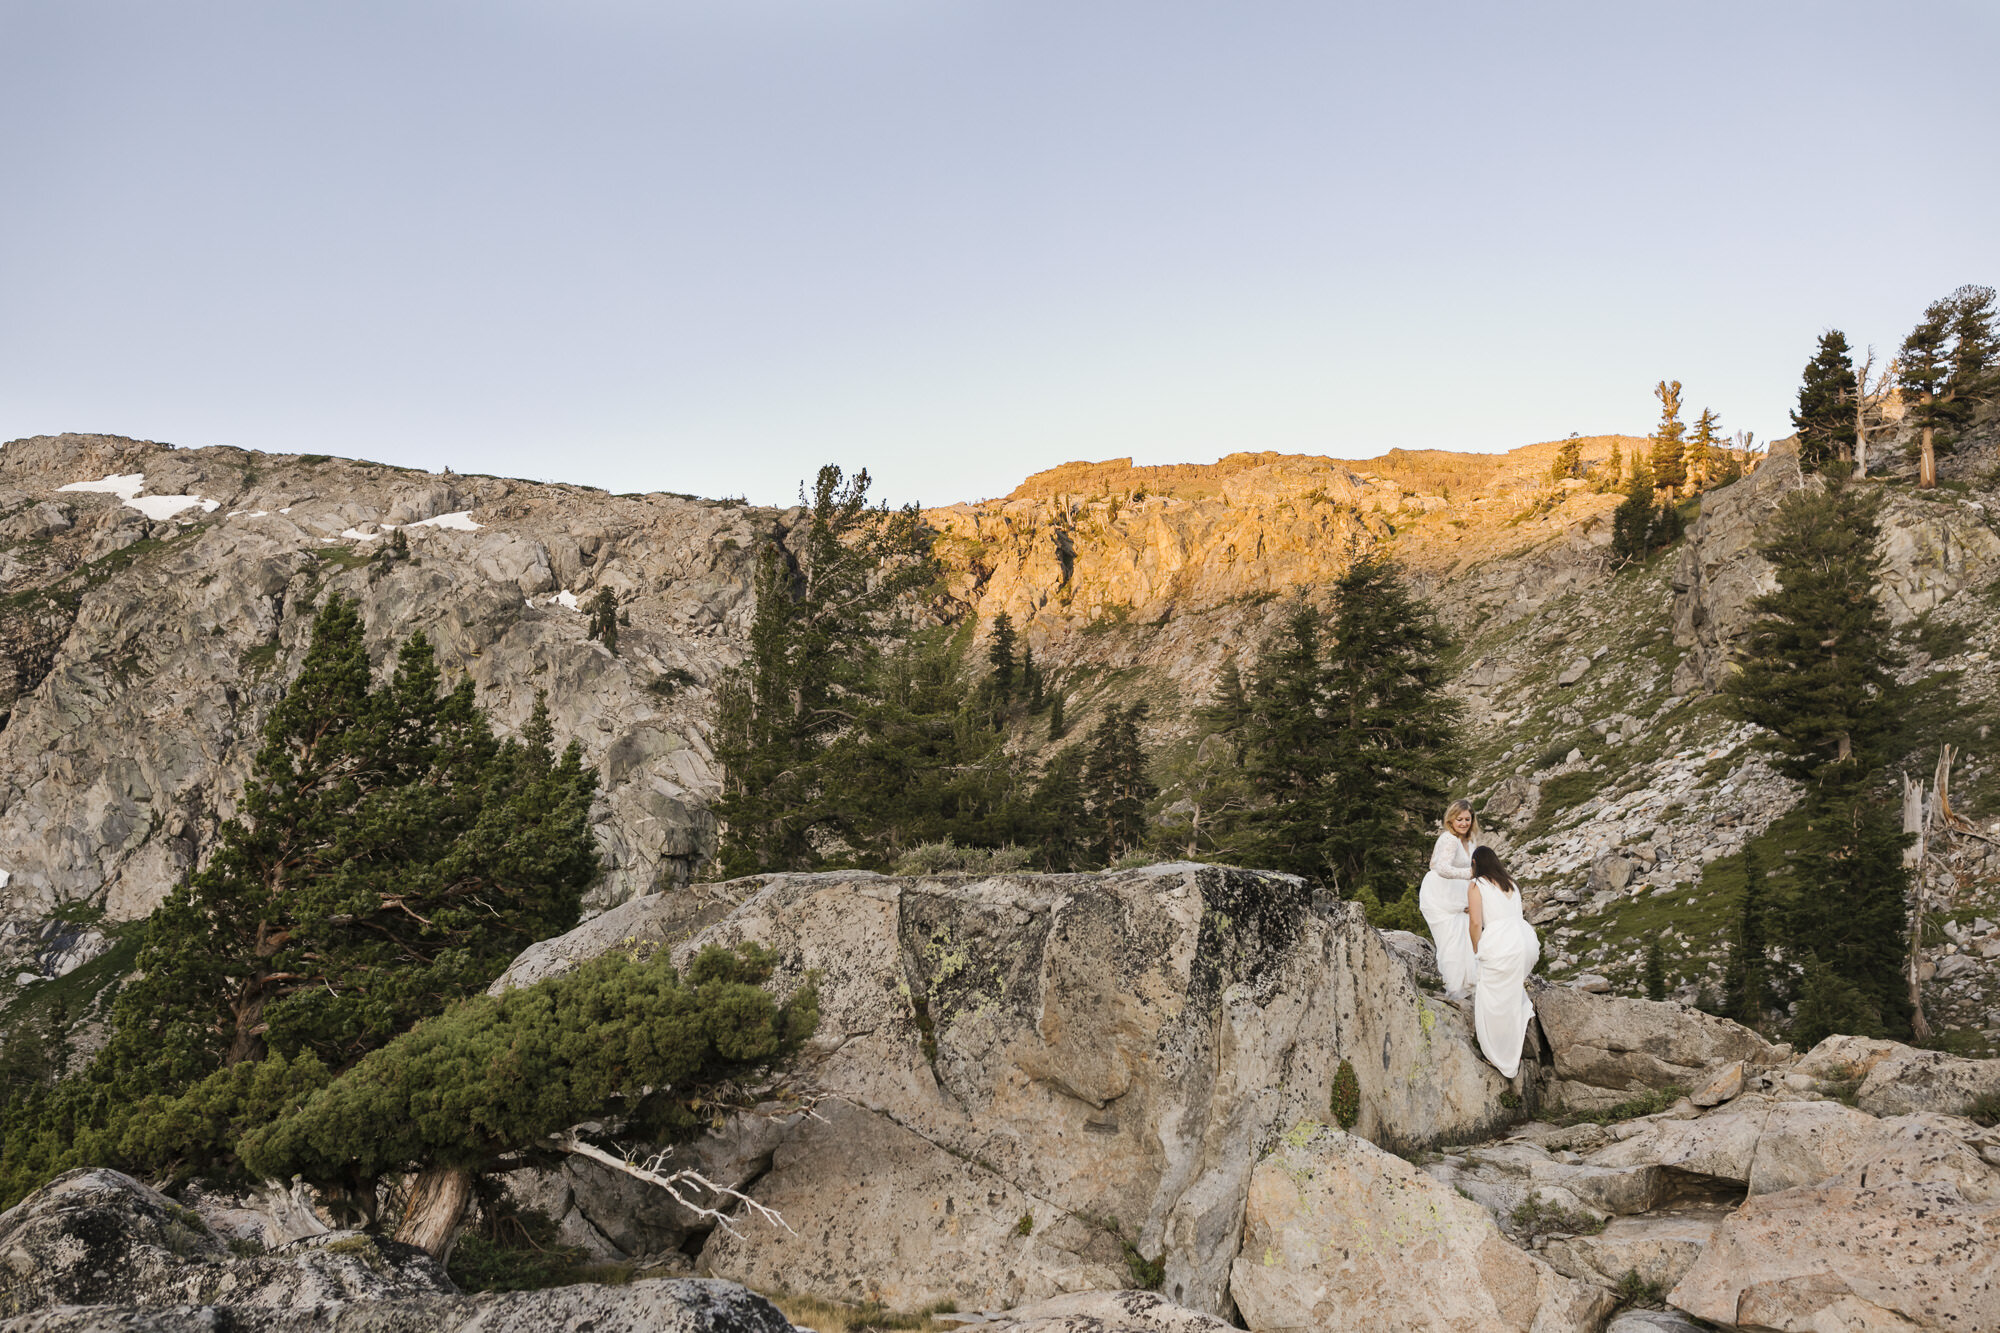 Wedding couple help each other climb rocks at sunrise with the alpenglow behind them in the California mountains